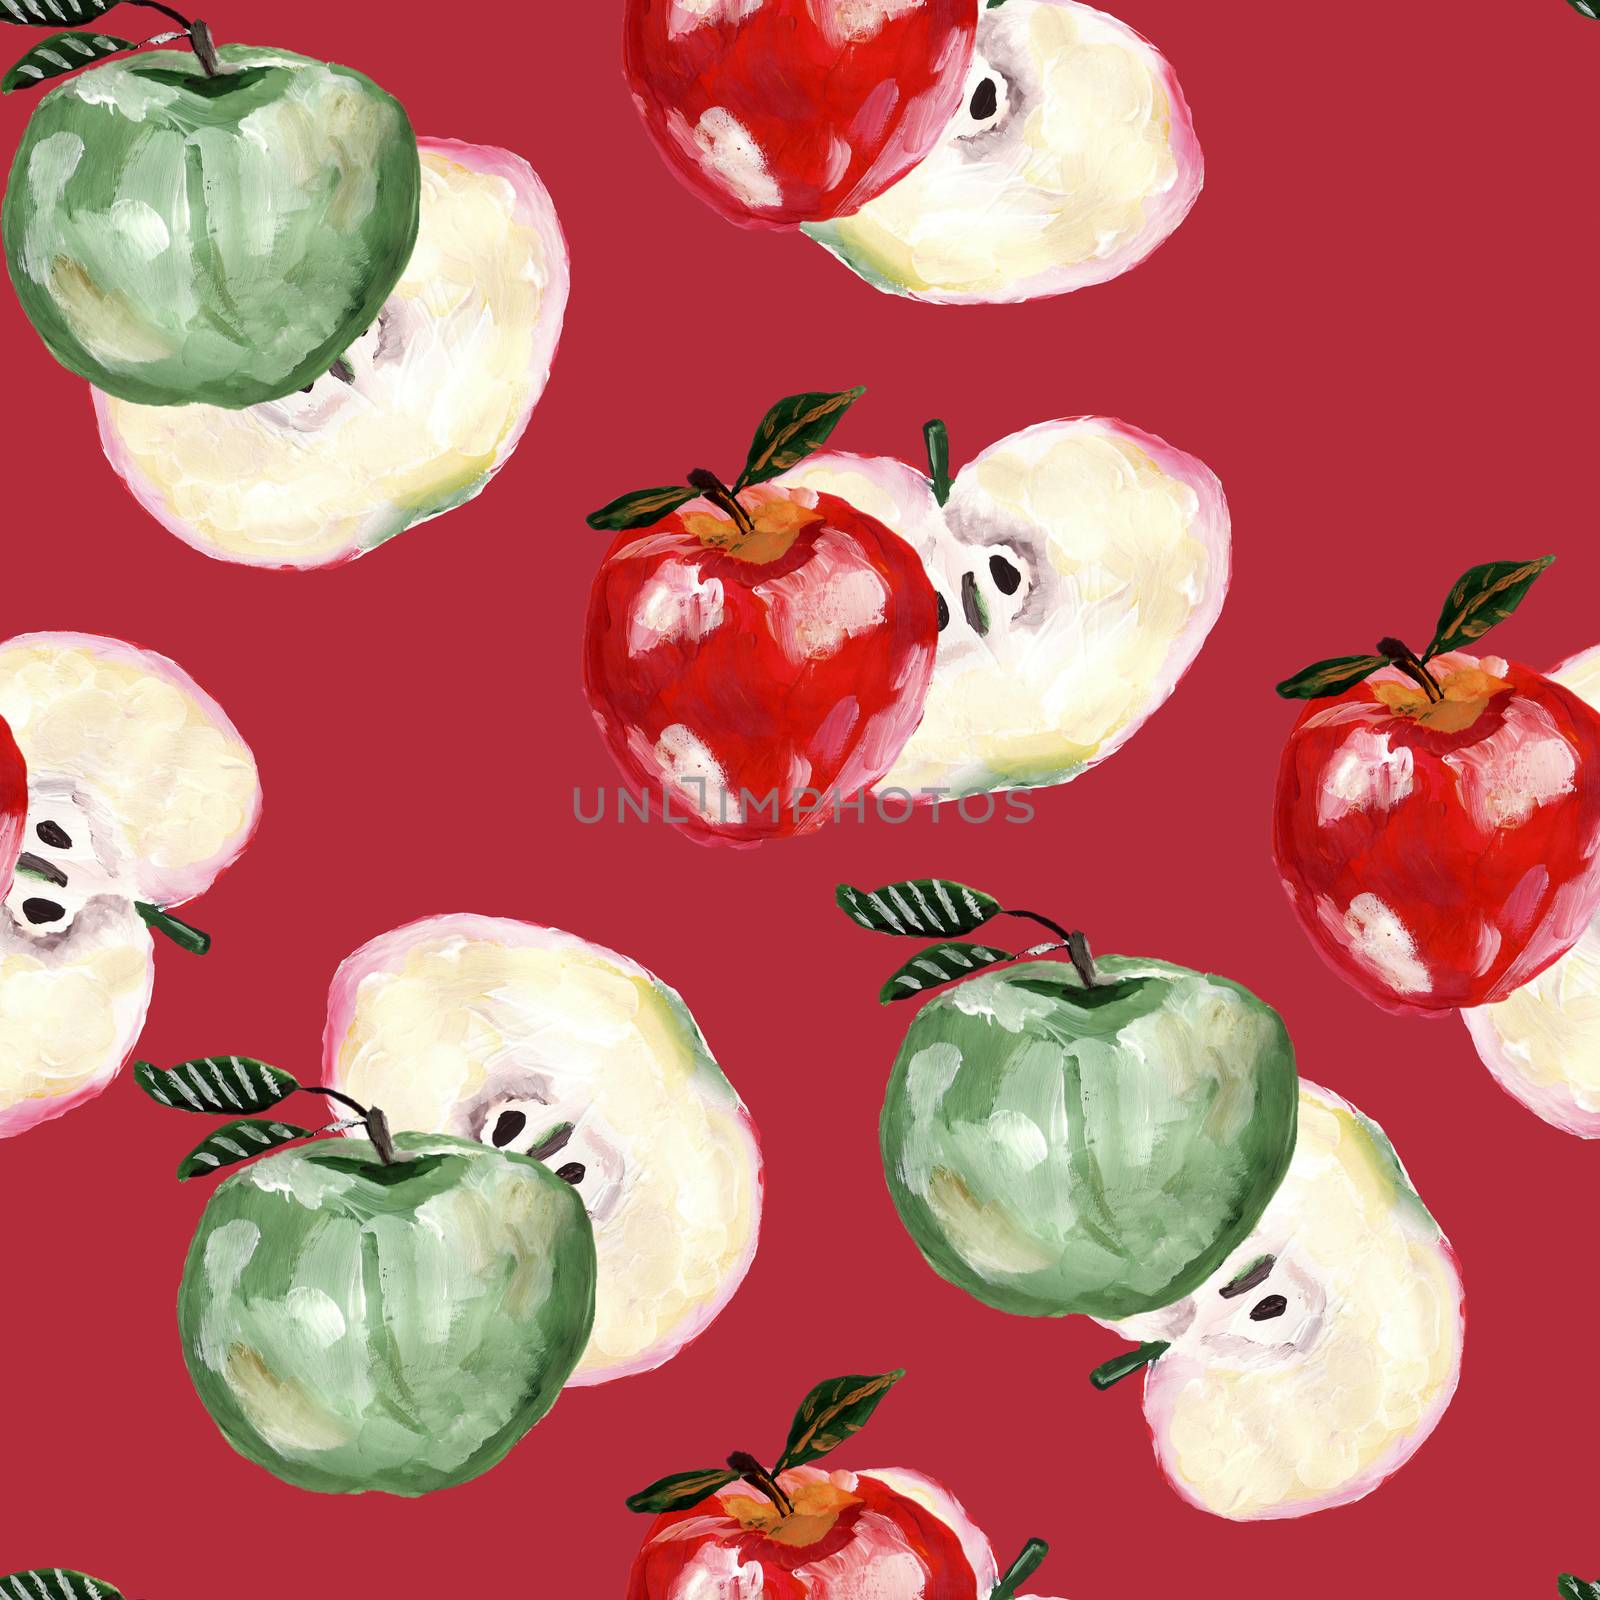 Hand drawn seamless pattern with green, red apples and slices of apples. Repeated apple and leaves fruit background for design, fabric, print, textile, textile, wallpaper, posters.